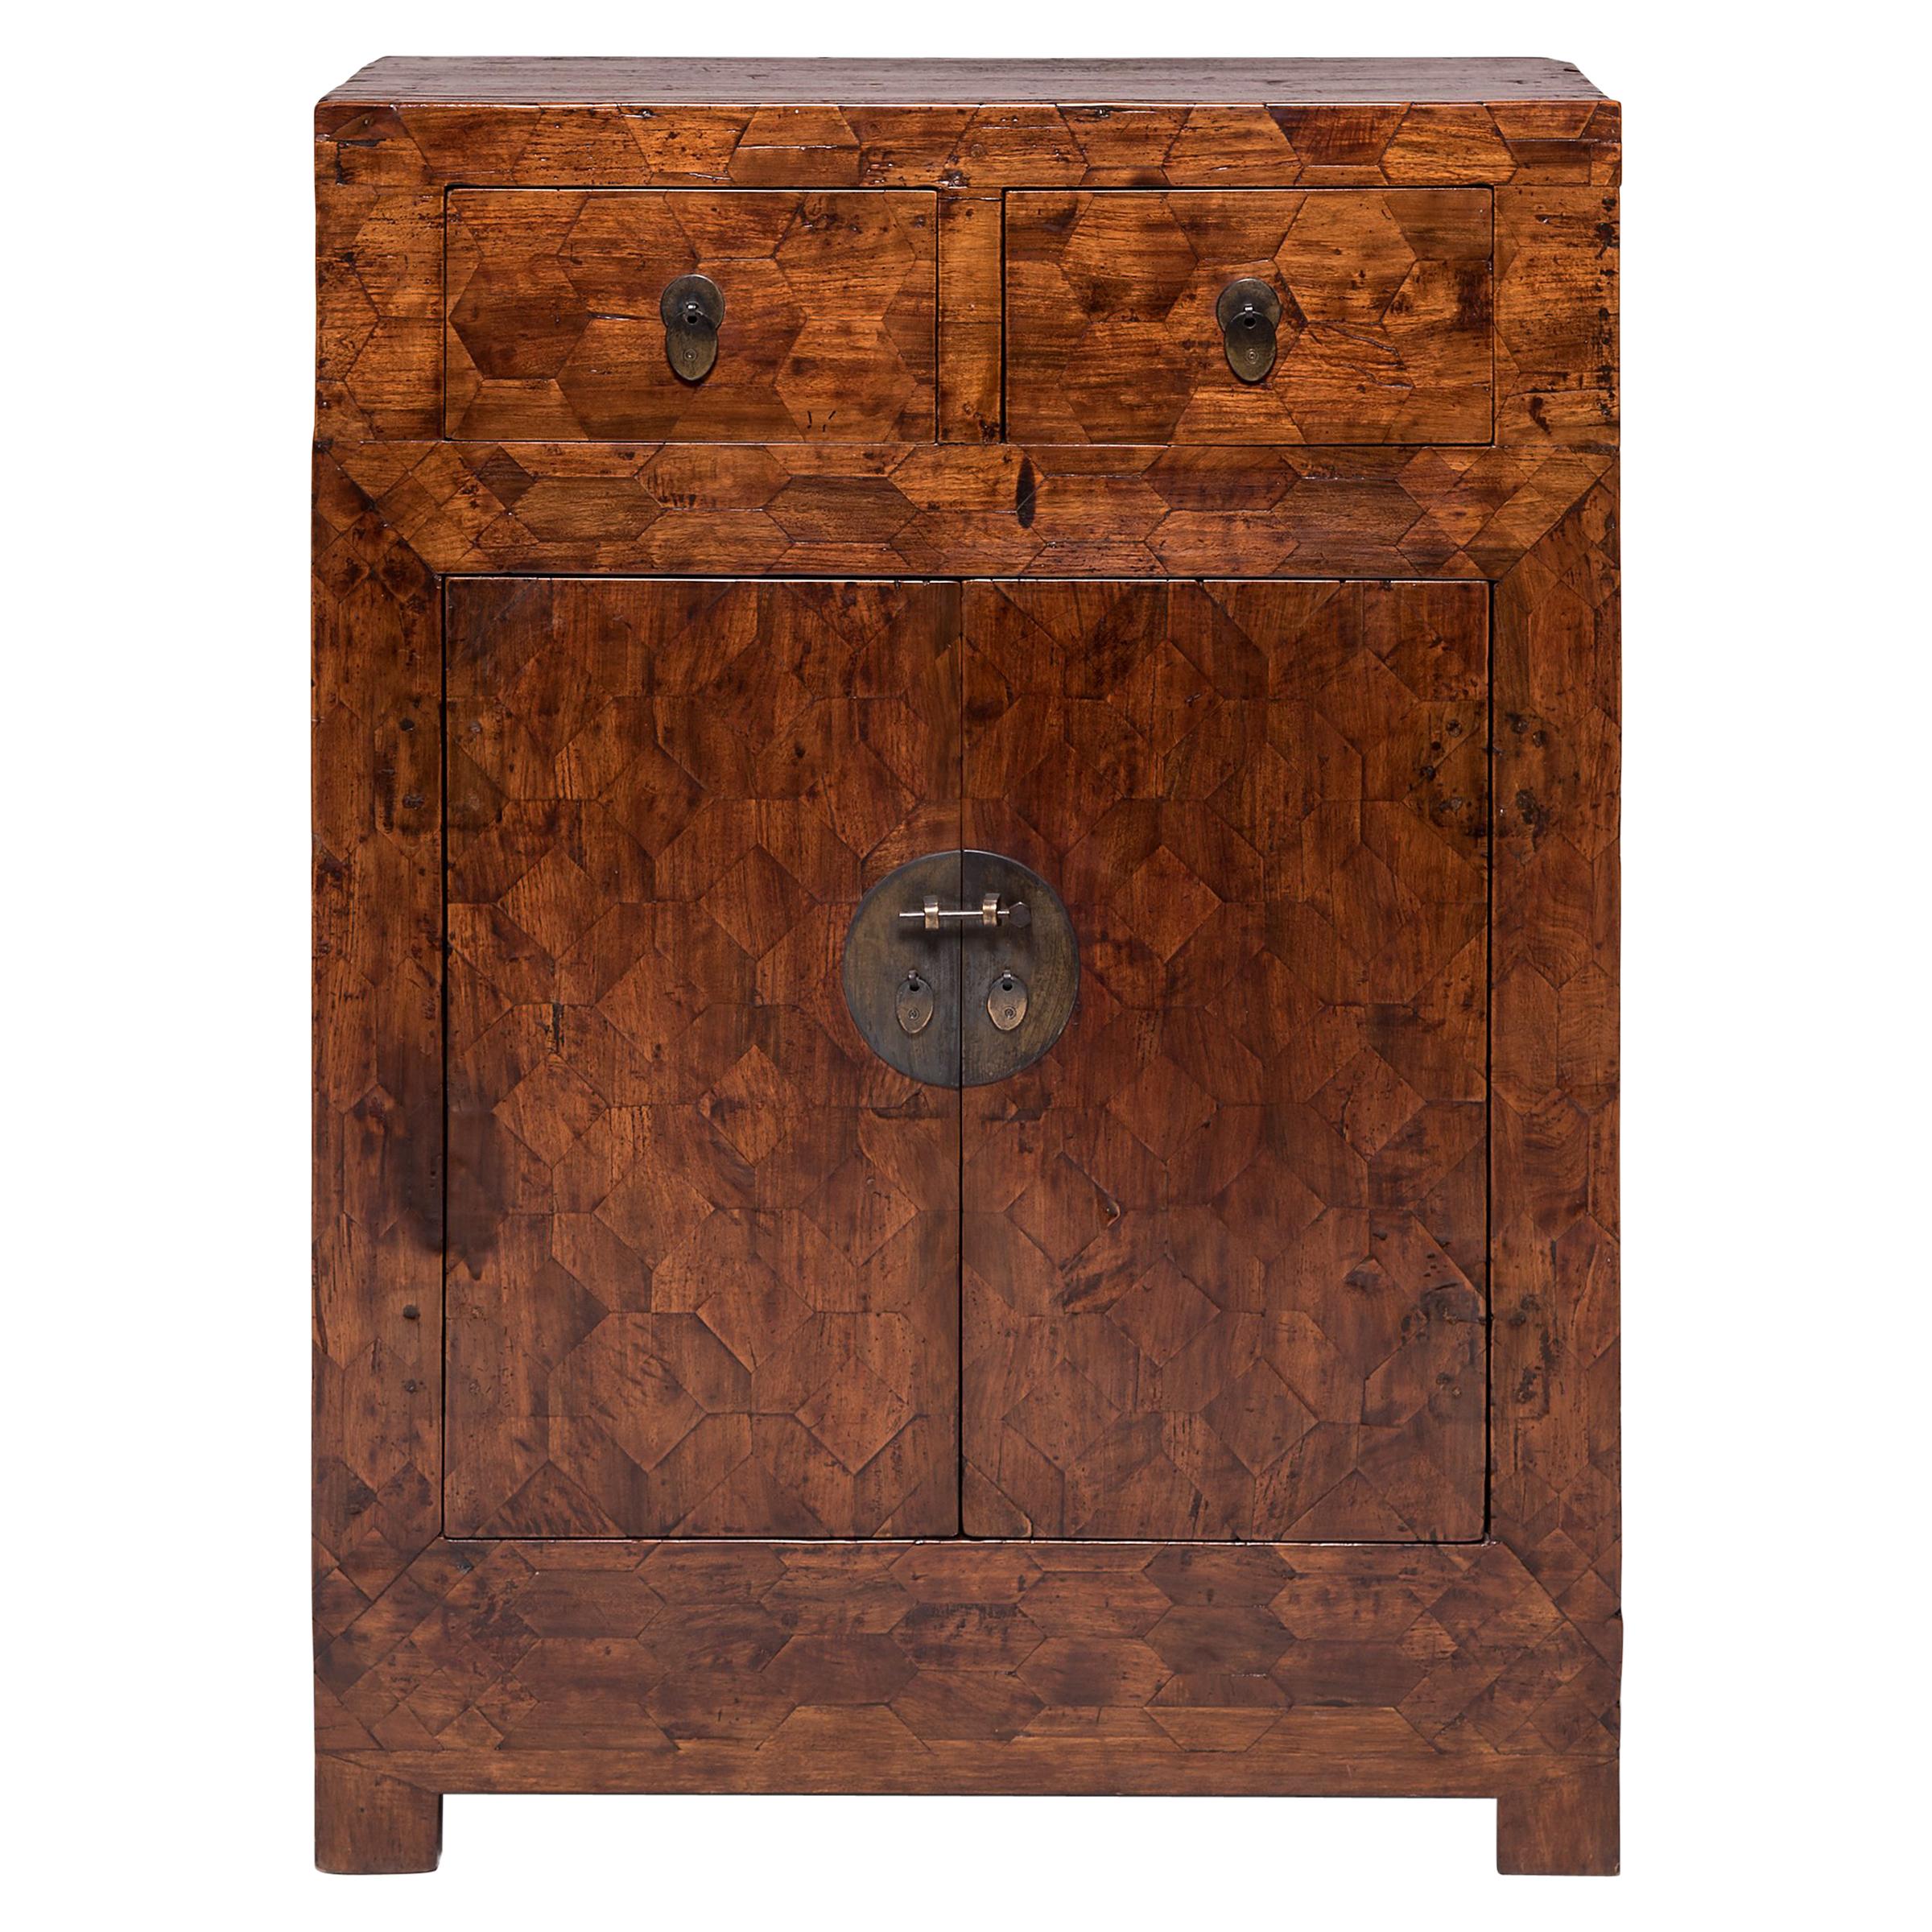 Early 20th Century Chinese Mixed Parquetry Cabinet